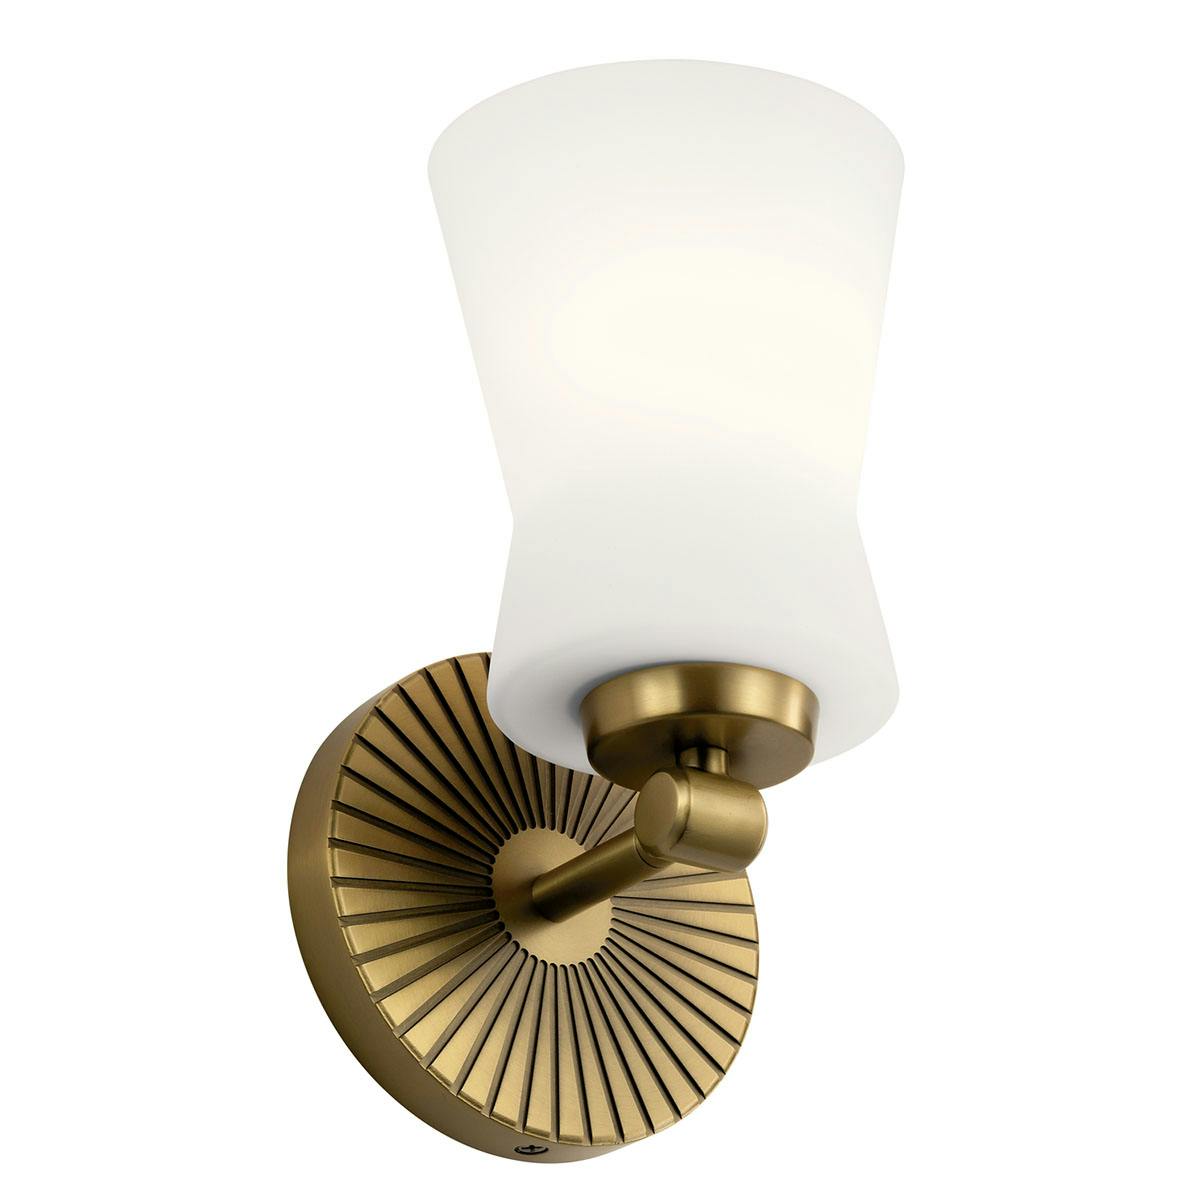 Brianne 9.5" 1 Light Sconce Brass on a white background